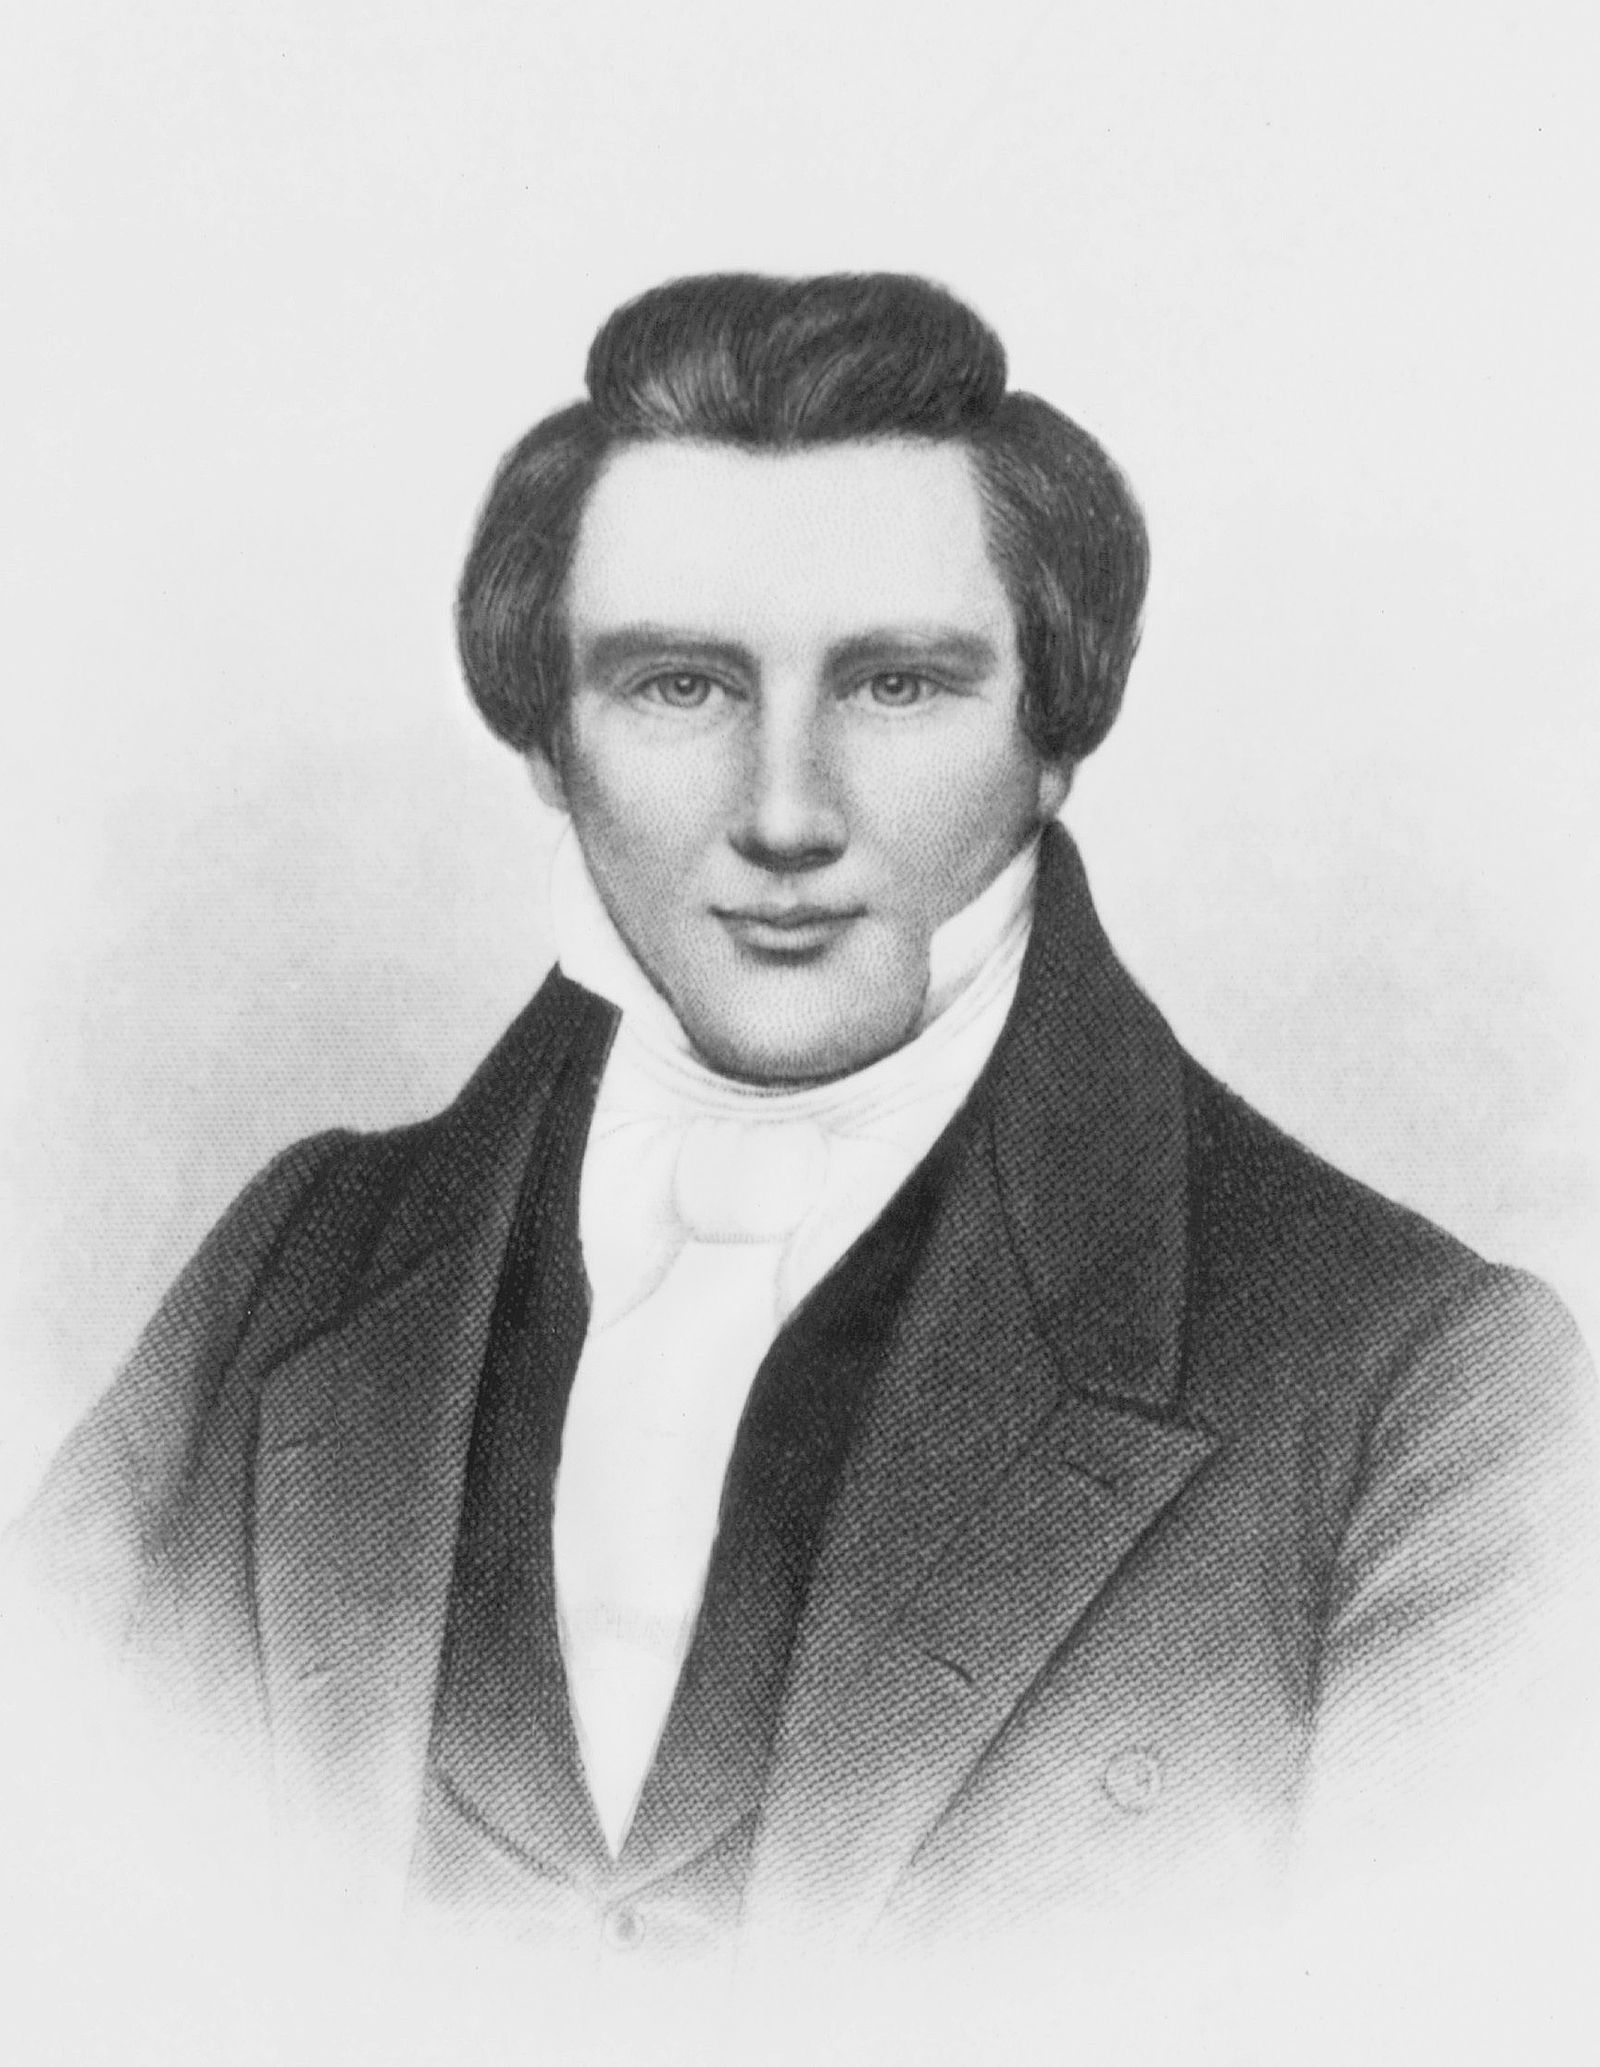 Joseph Smith Jr., by H. B. Hall & Sons of New York